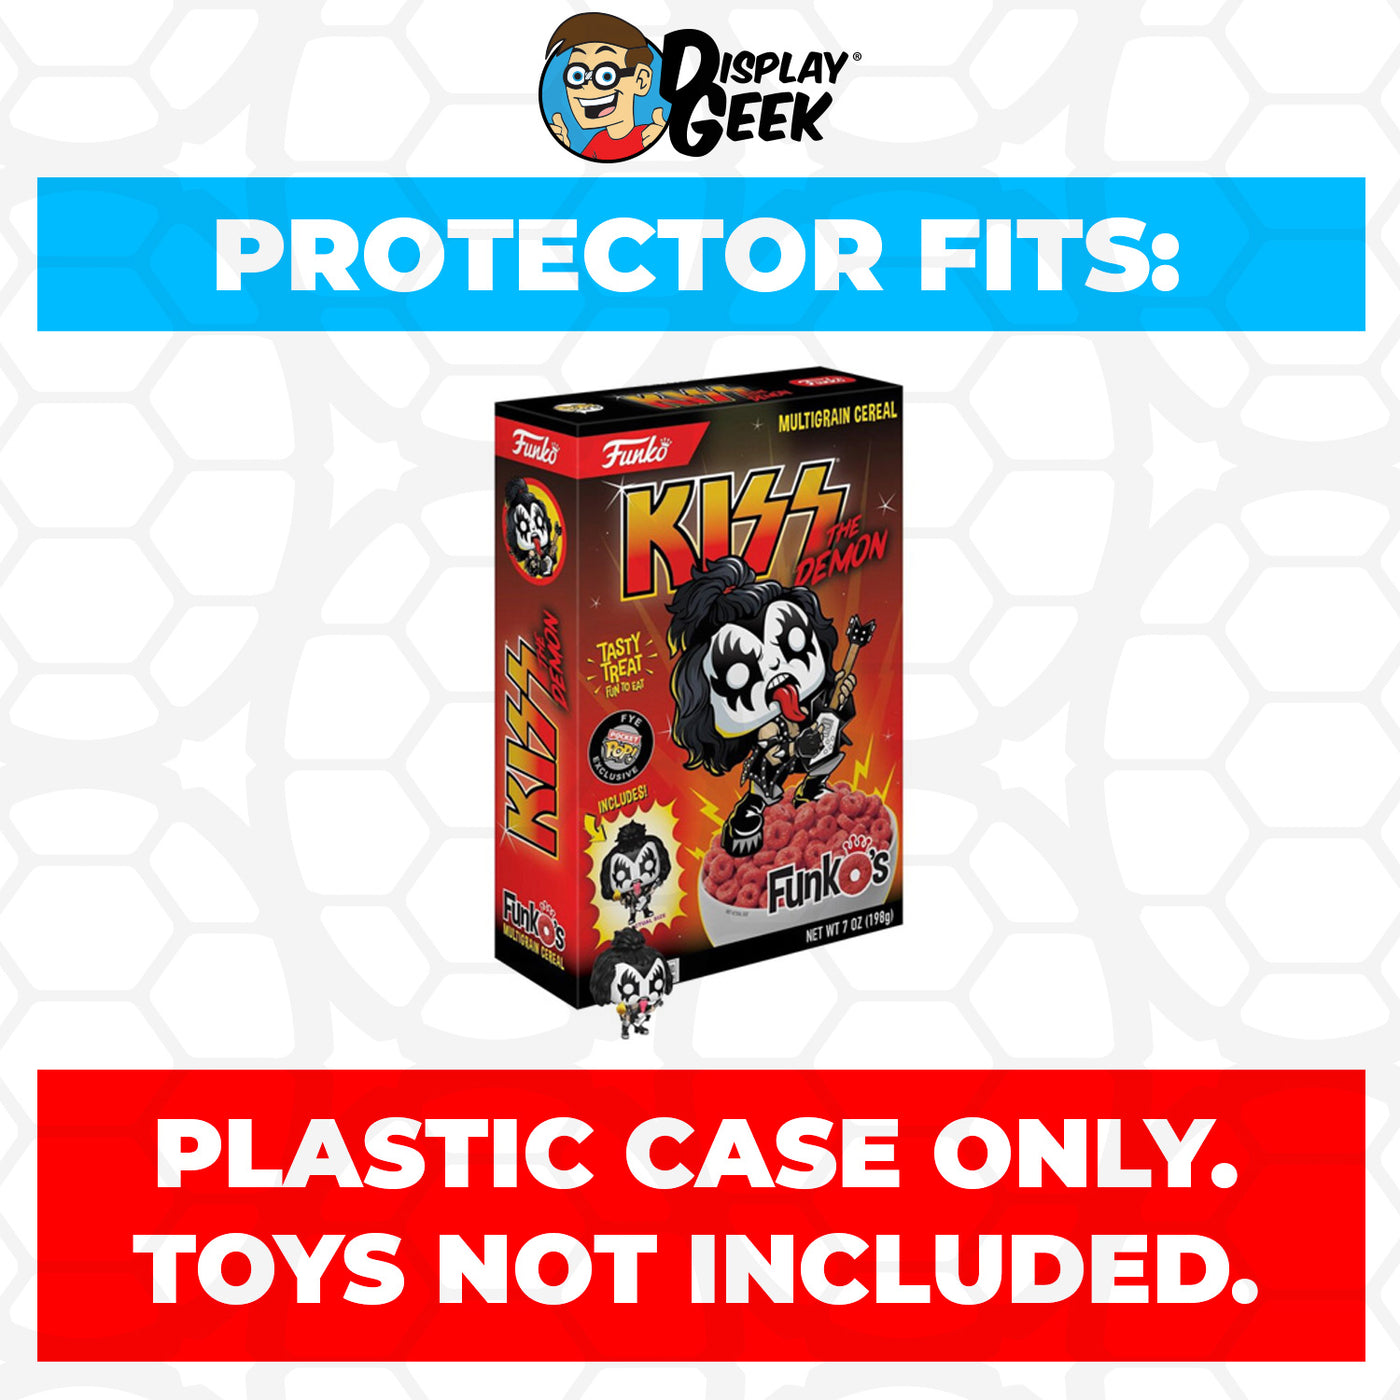 Pop Protector for KISS Gene Simmons The Demon FunkO's Cereal Box on The Protector Guide App by Display Geek